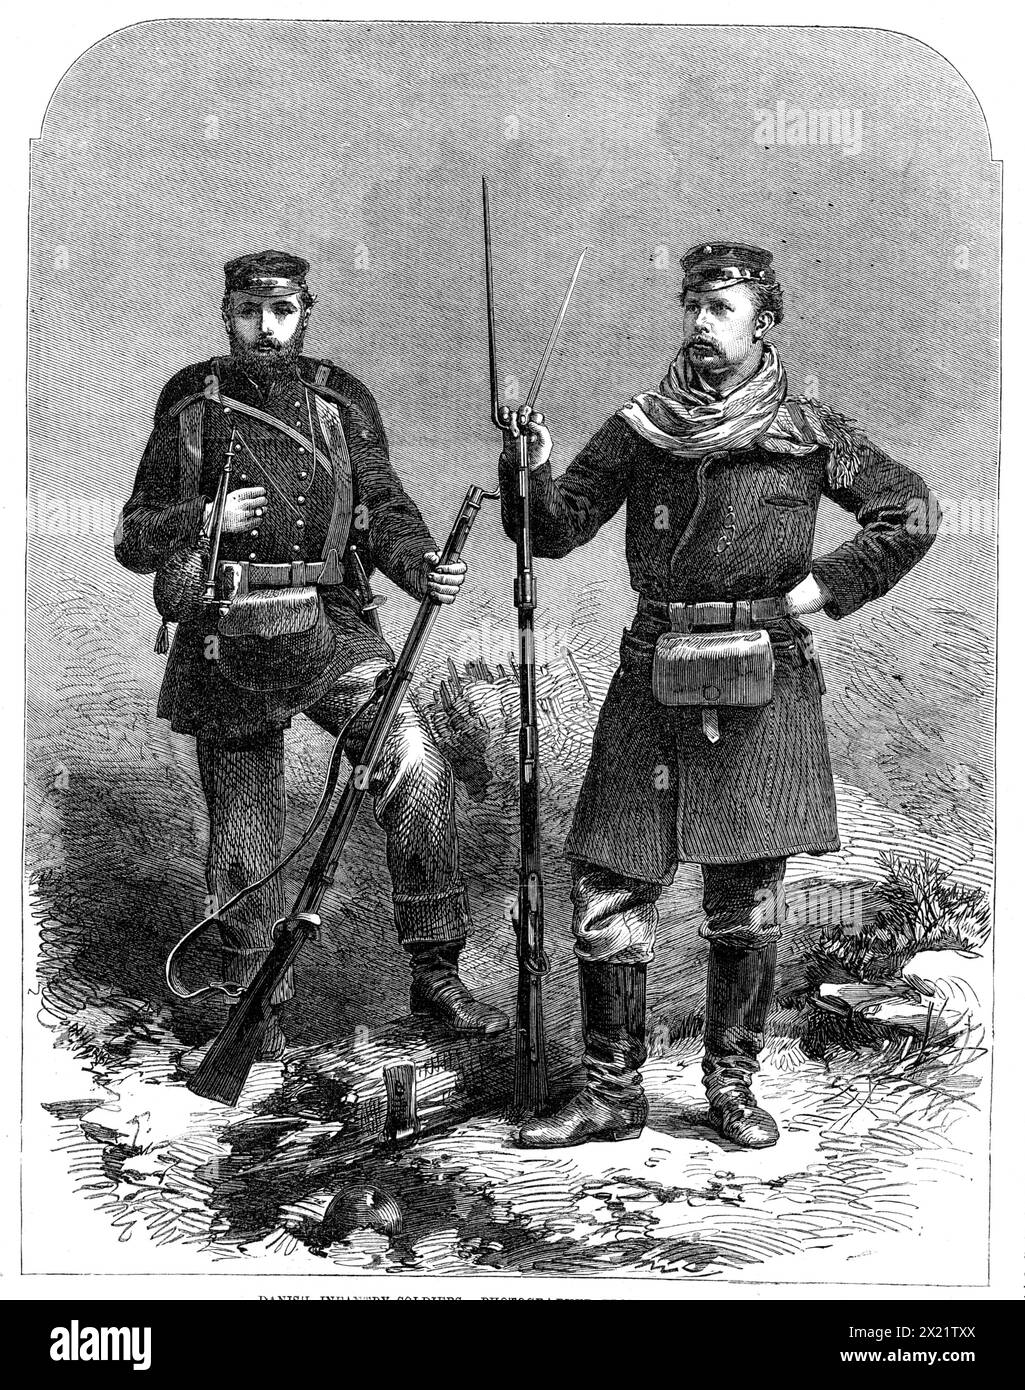 Danish infantry soldiers - photographed from the life, 1864. Engraving from a sketch '...by our own Artist at the head-quarters of the Prussian army...[of] two of the Danish infantry soldiers; one of them, as he appeared when the photograph was taken, just ready to march for his regiment; and the other, who belongs to the 1st Regiment of the Line, stationed on the lookout. Both the men's likenesses are well preserved; and in each case we are struck with the intelligence, the spirit, and the manly simplicity of the men's expression of face. Their uniform is plain and convenient, though of cours Stock Photo